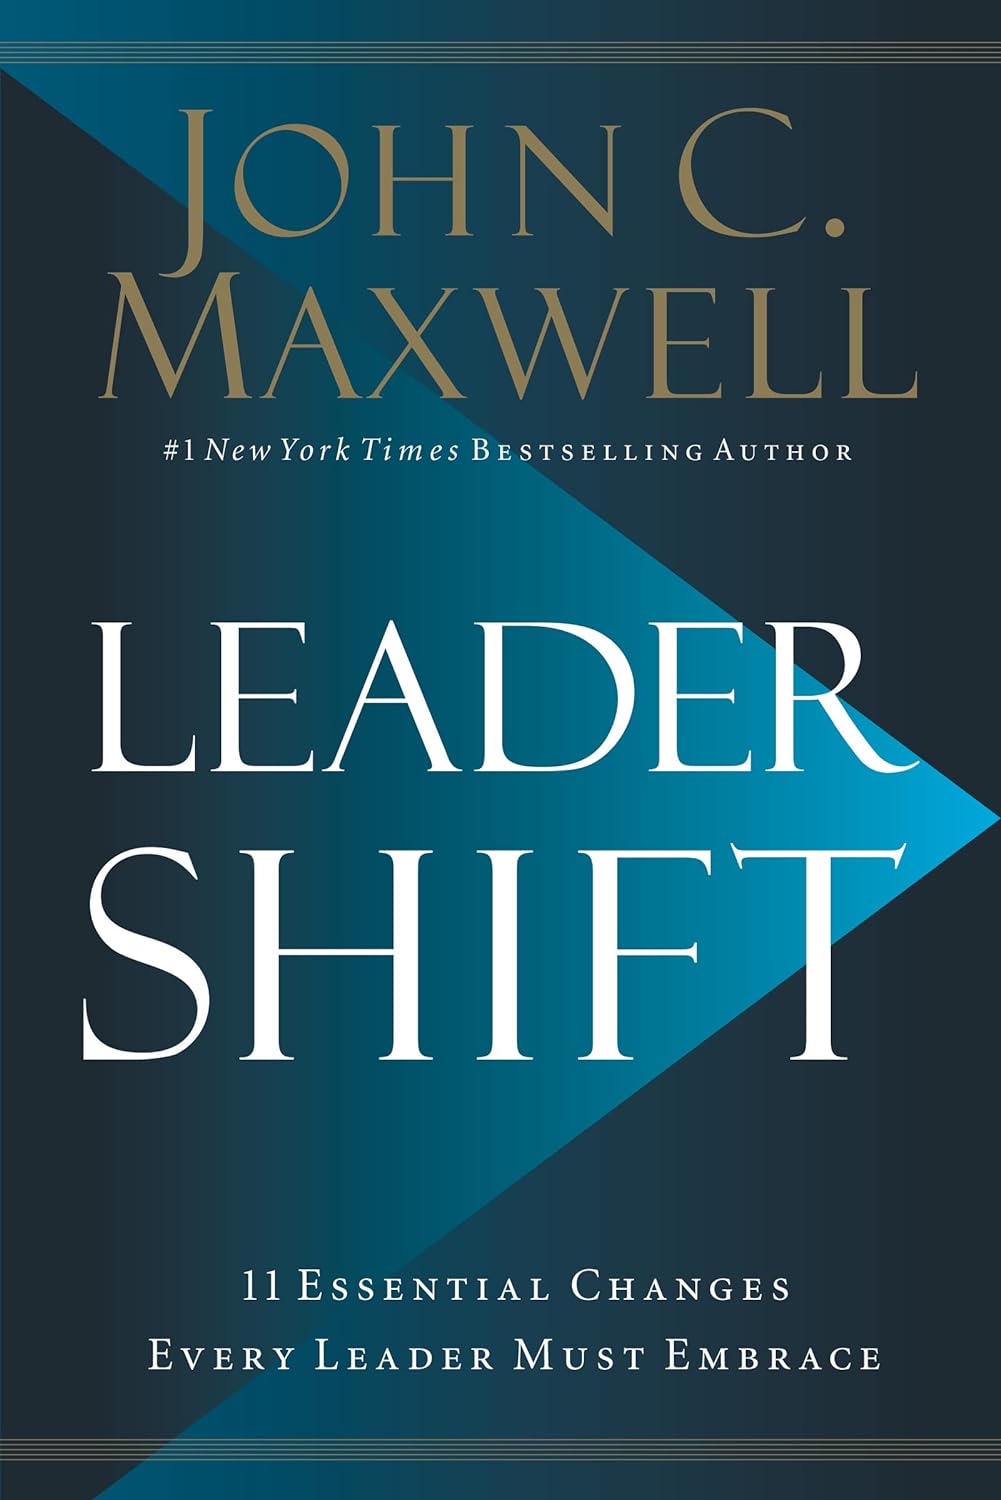 John C. Maxwell - Leadershift - The 11 Essential Changes Every Leader Must Embrace